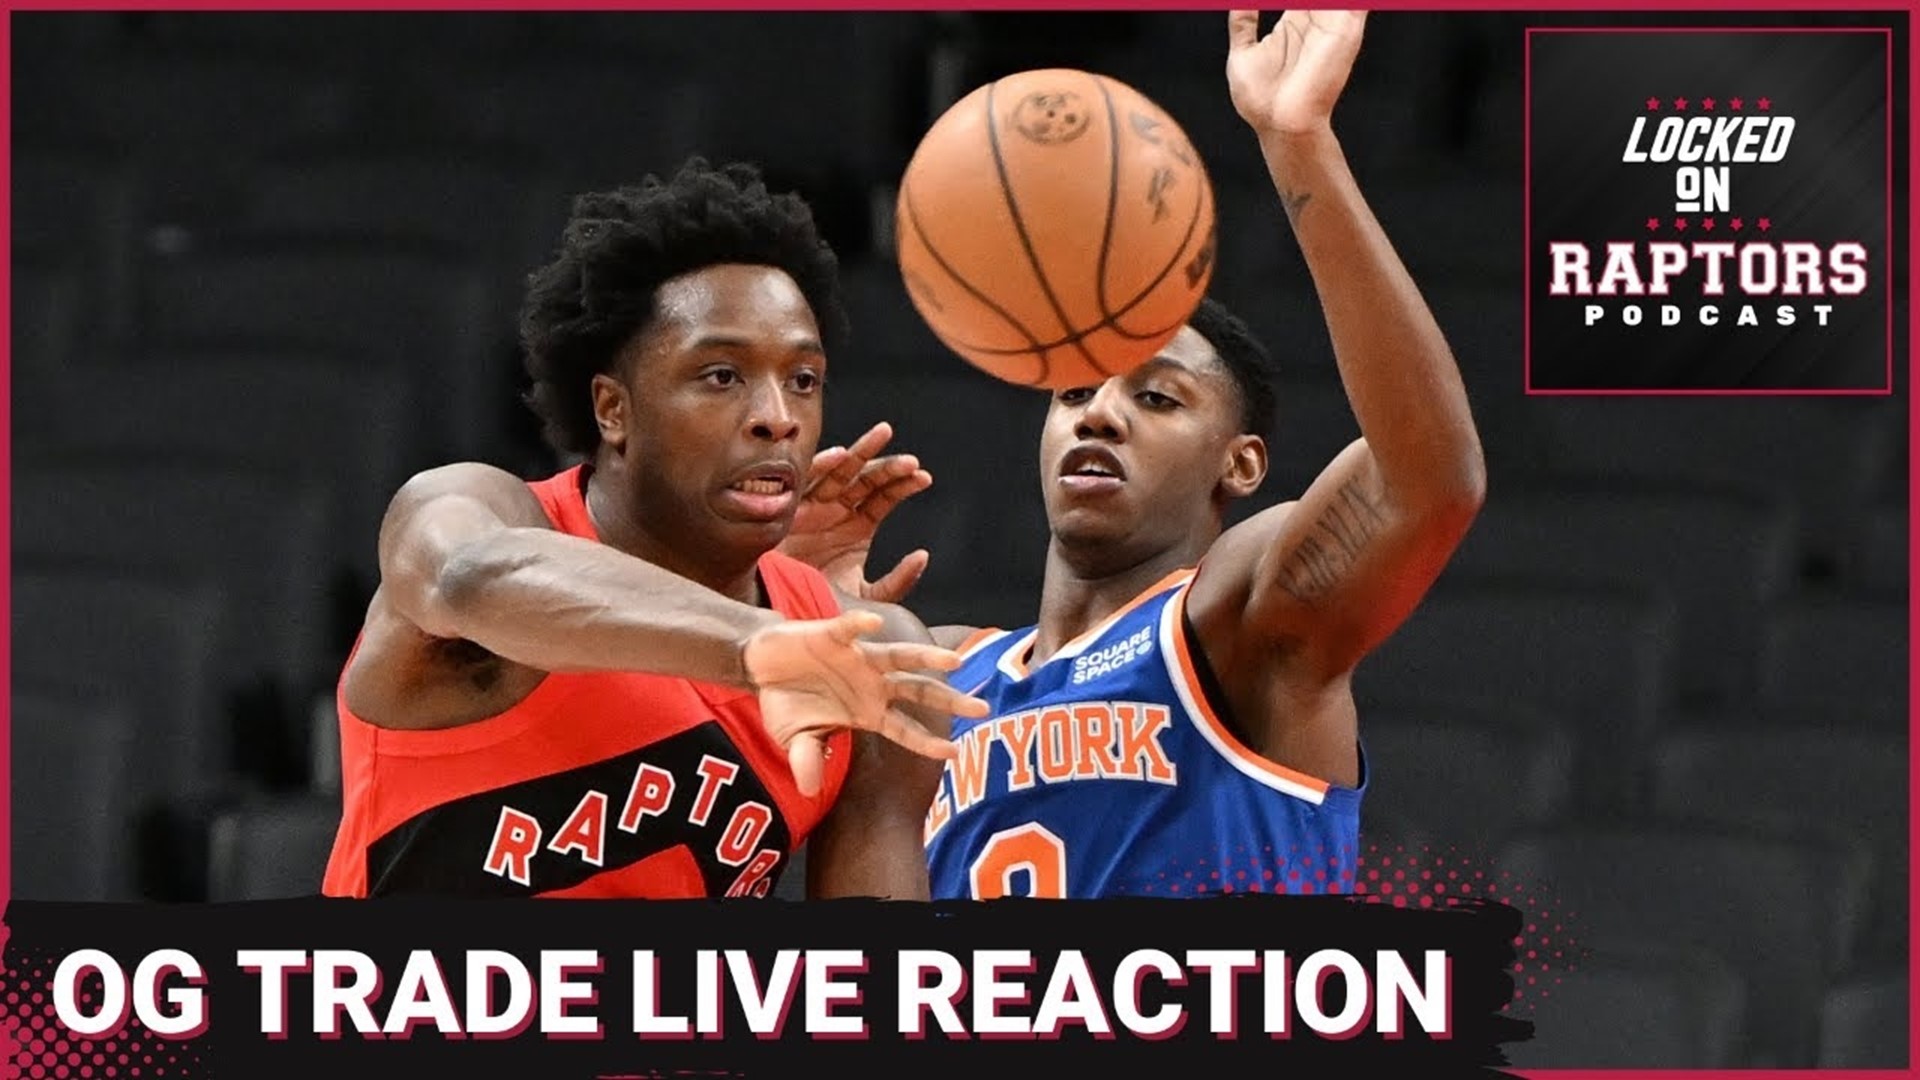 Sean Woodley goes live to react to the Toronto Raptors reportedly trading O.G. Anunoby, Malachi Flynn and Precious Achiuwa to the New York Knicks.